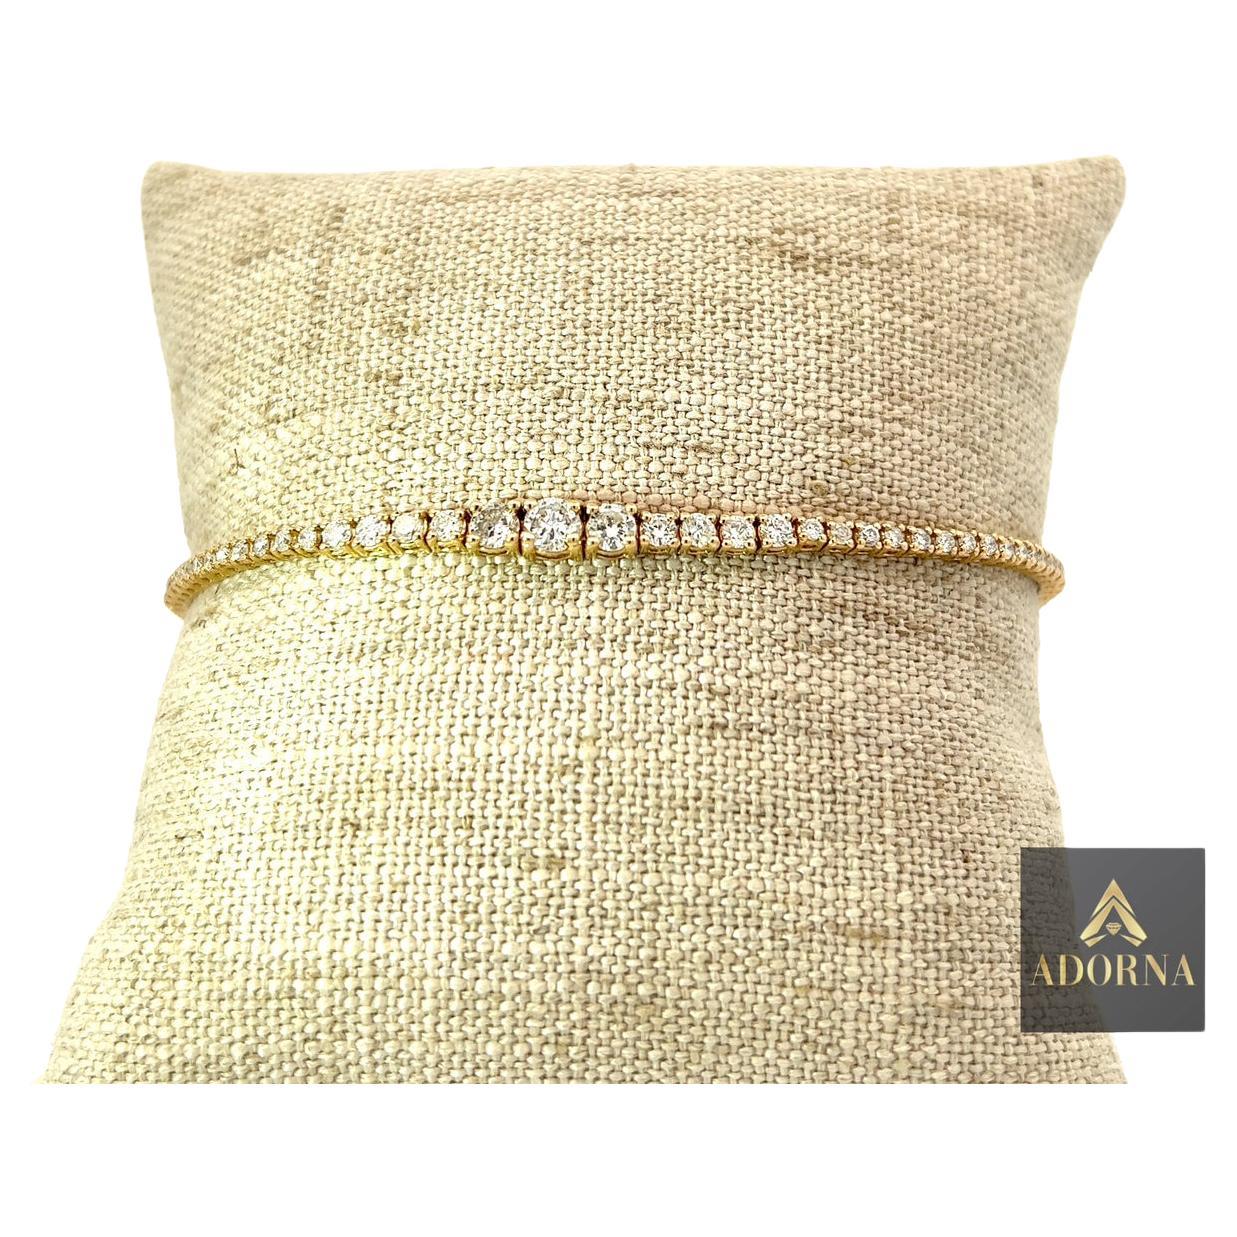 Adorna Lux - Luxury brilliance bracelet need to add 7 inches somewhere For Sale